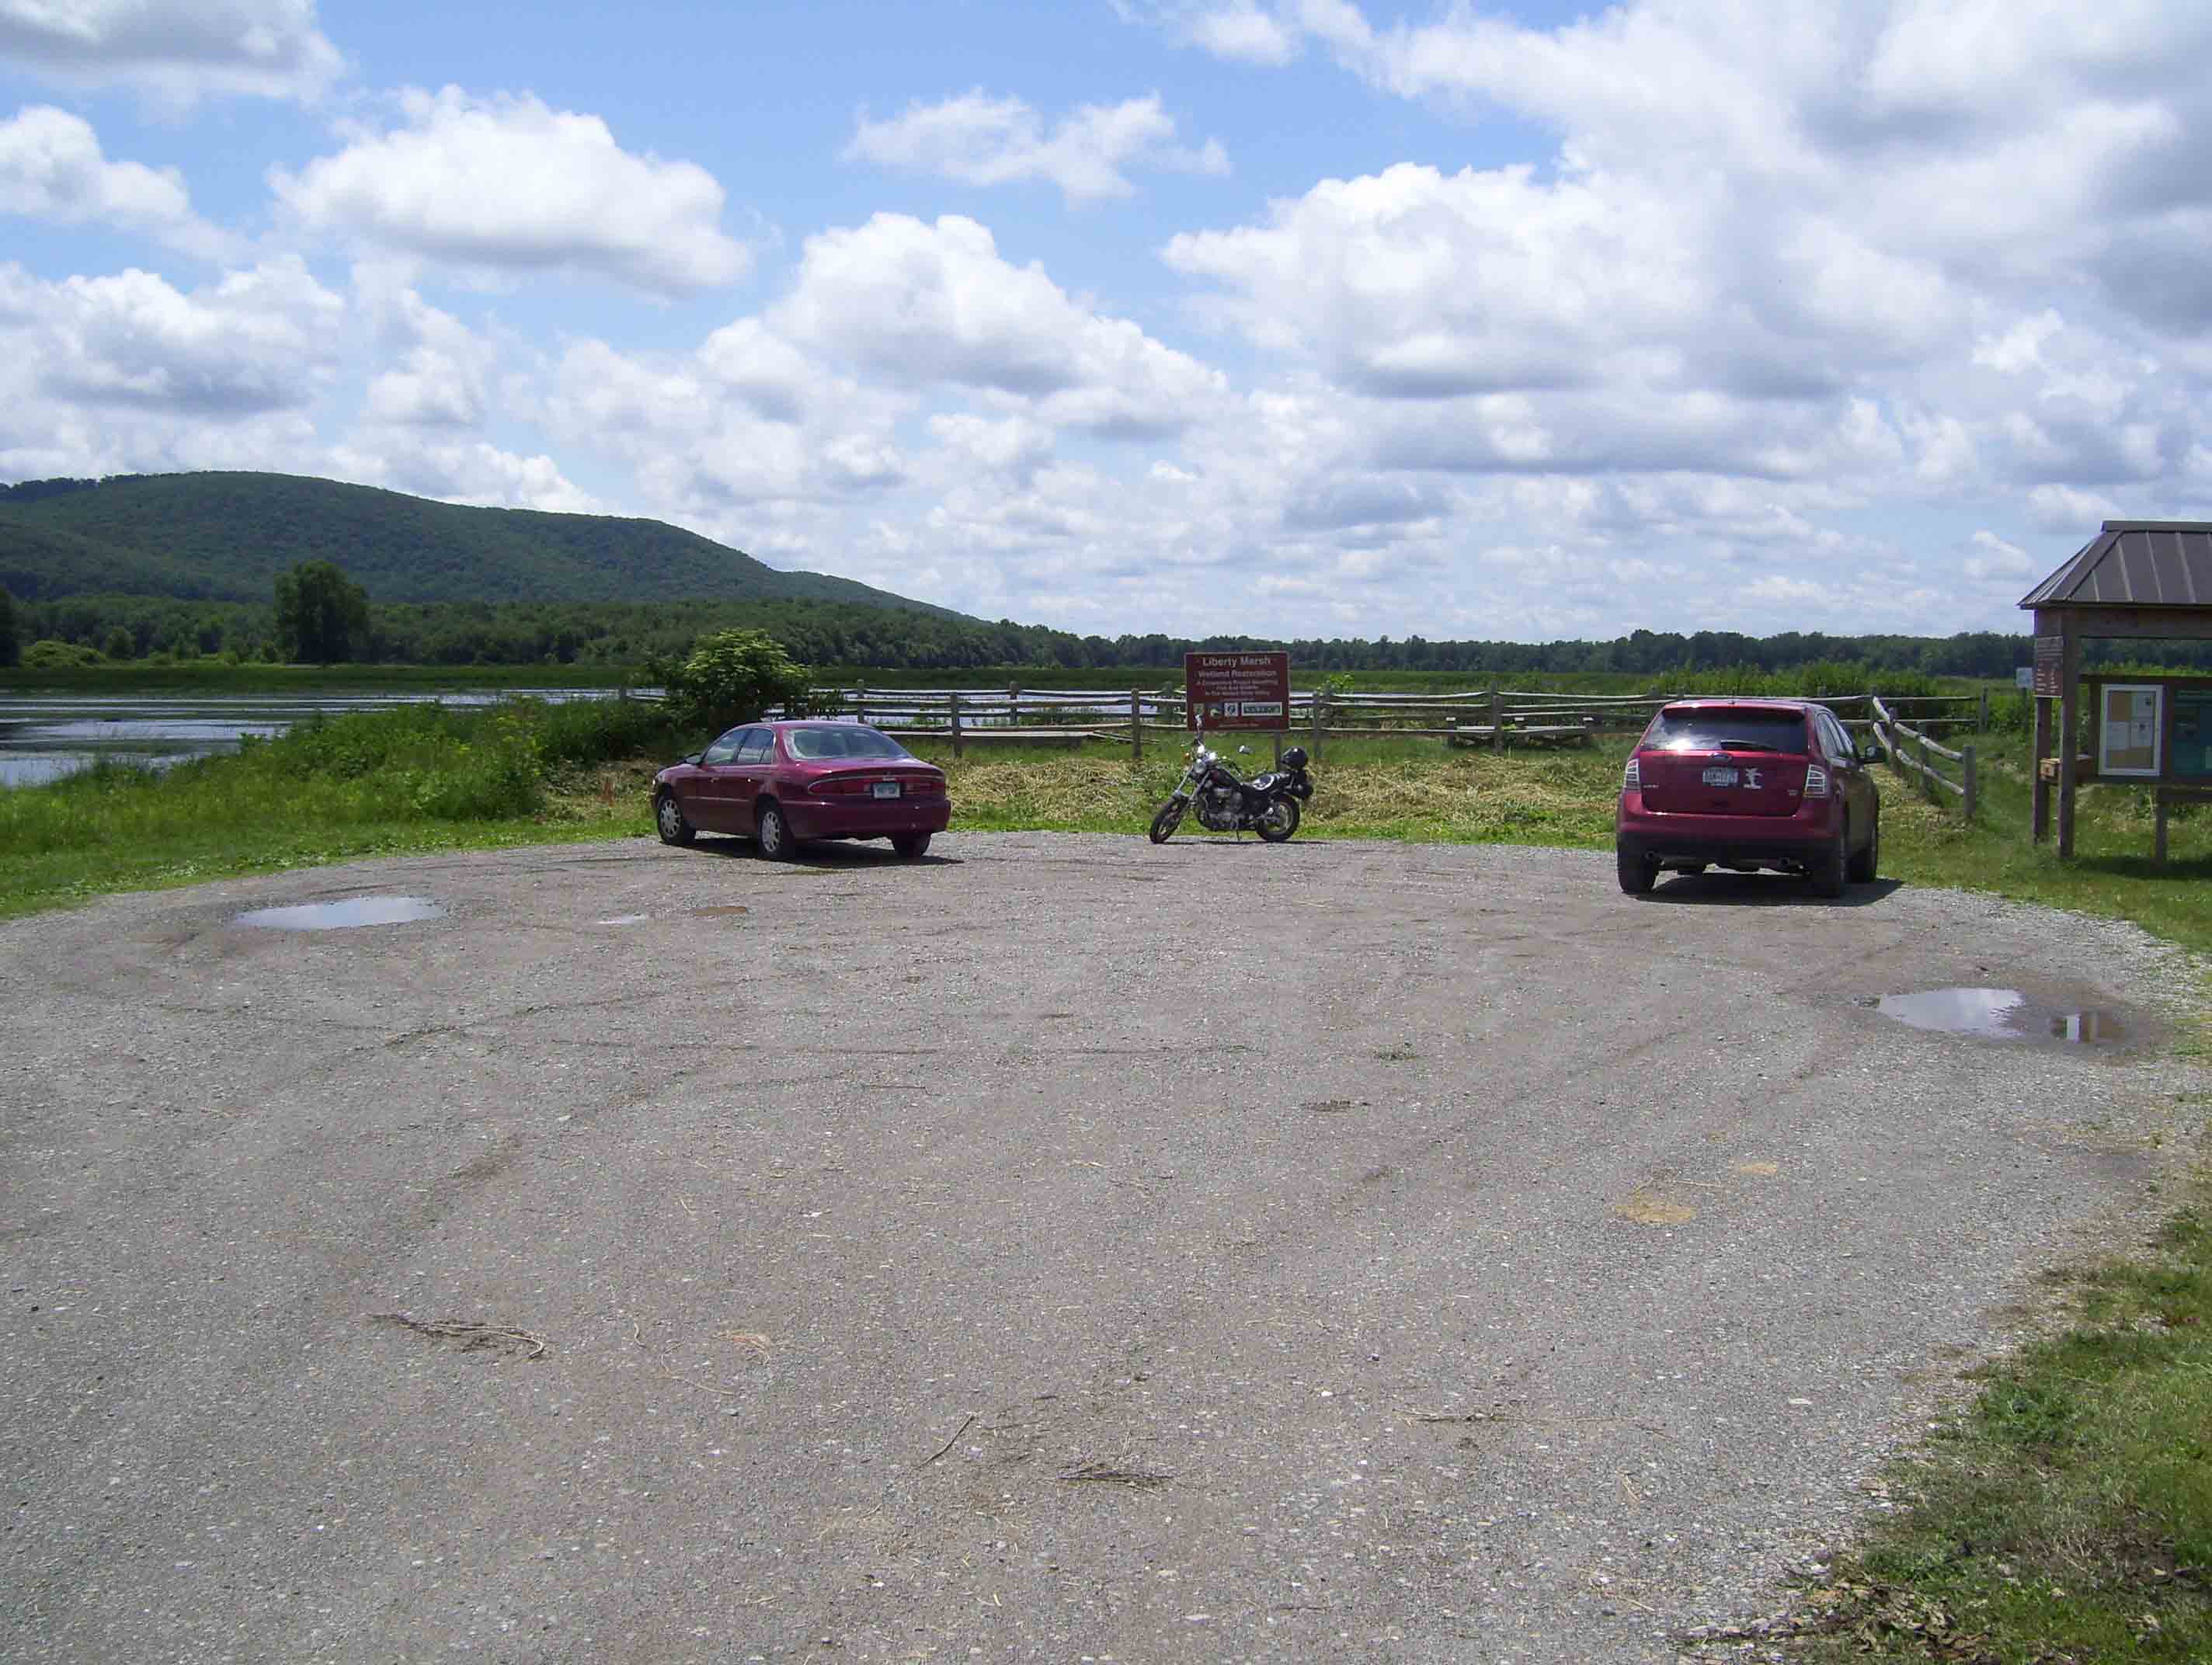 Parking area for Liberty Marsh, now part of the Walkill River National Wildlife Refuge. This is about 0.2 miles east of the point where the northbound AT leaves Oil City Road at mm 9.0.  Courtesy dlcul@conncoll.edu